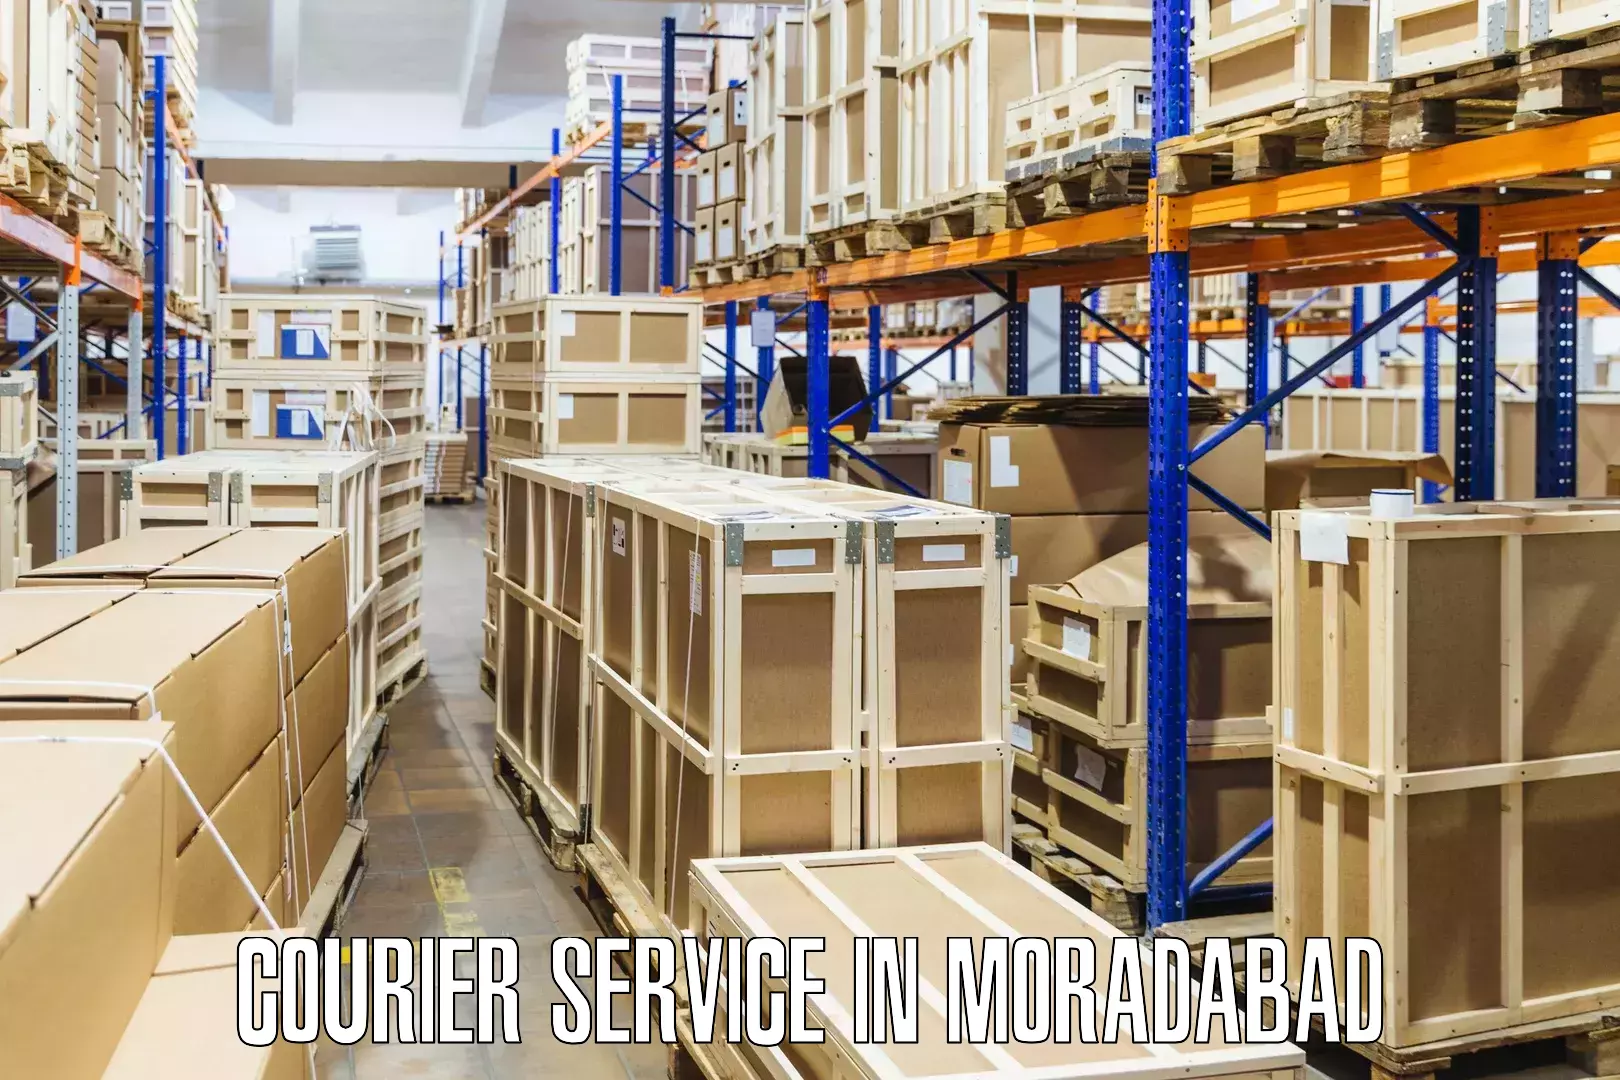 Multi-service courier options in Moradabad